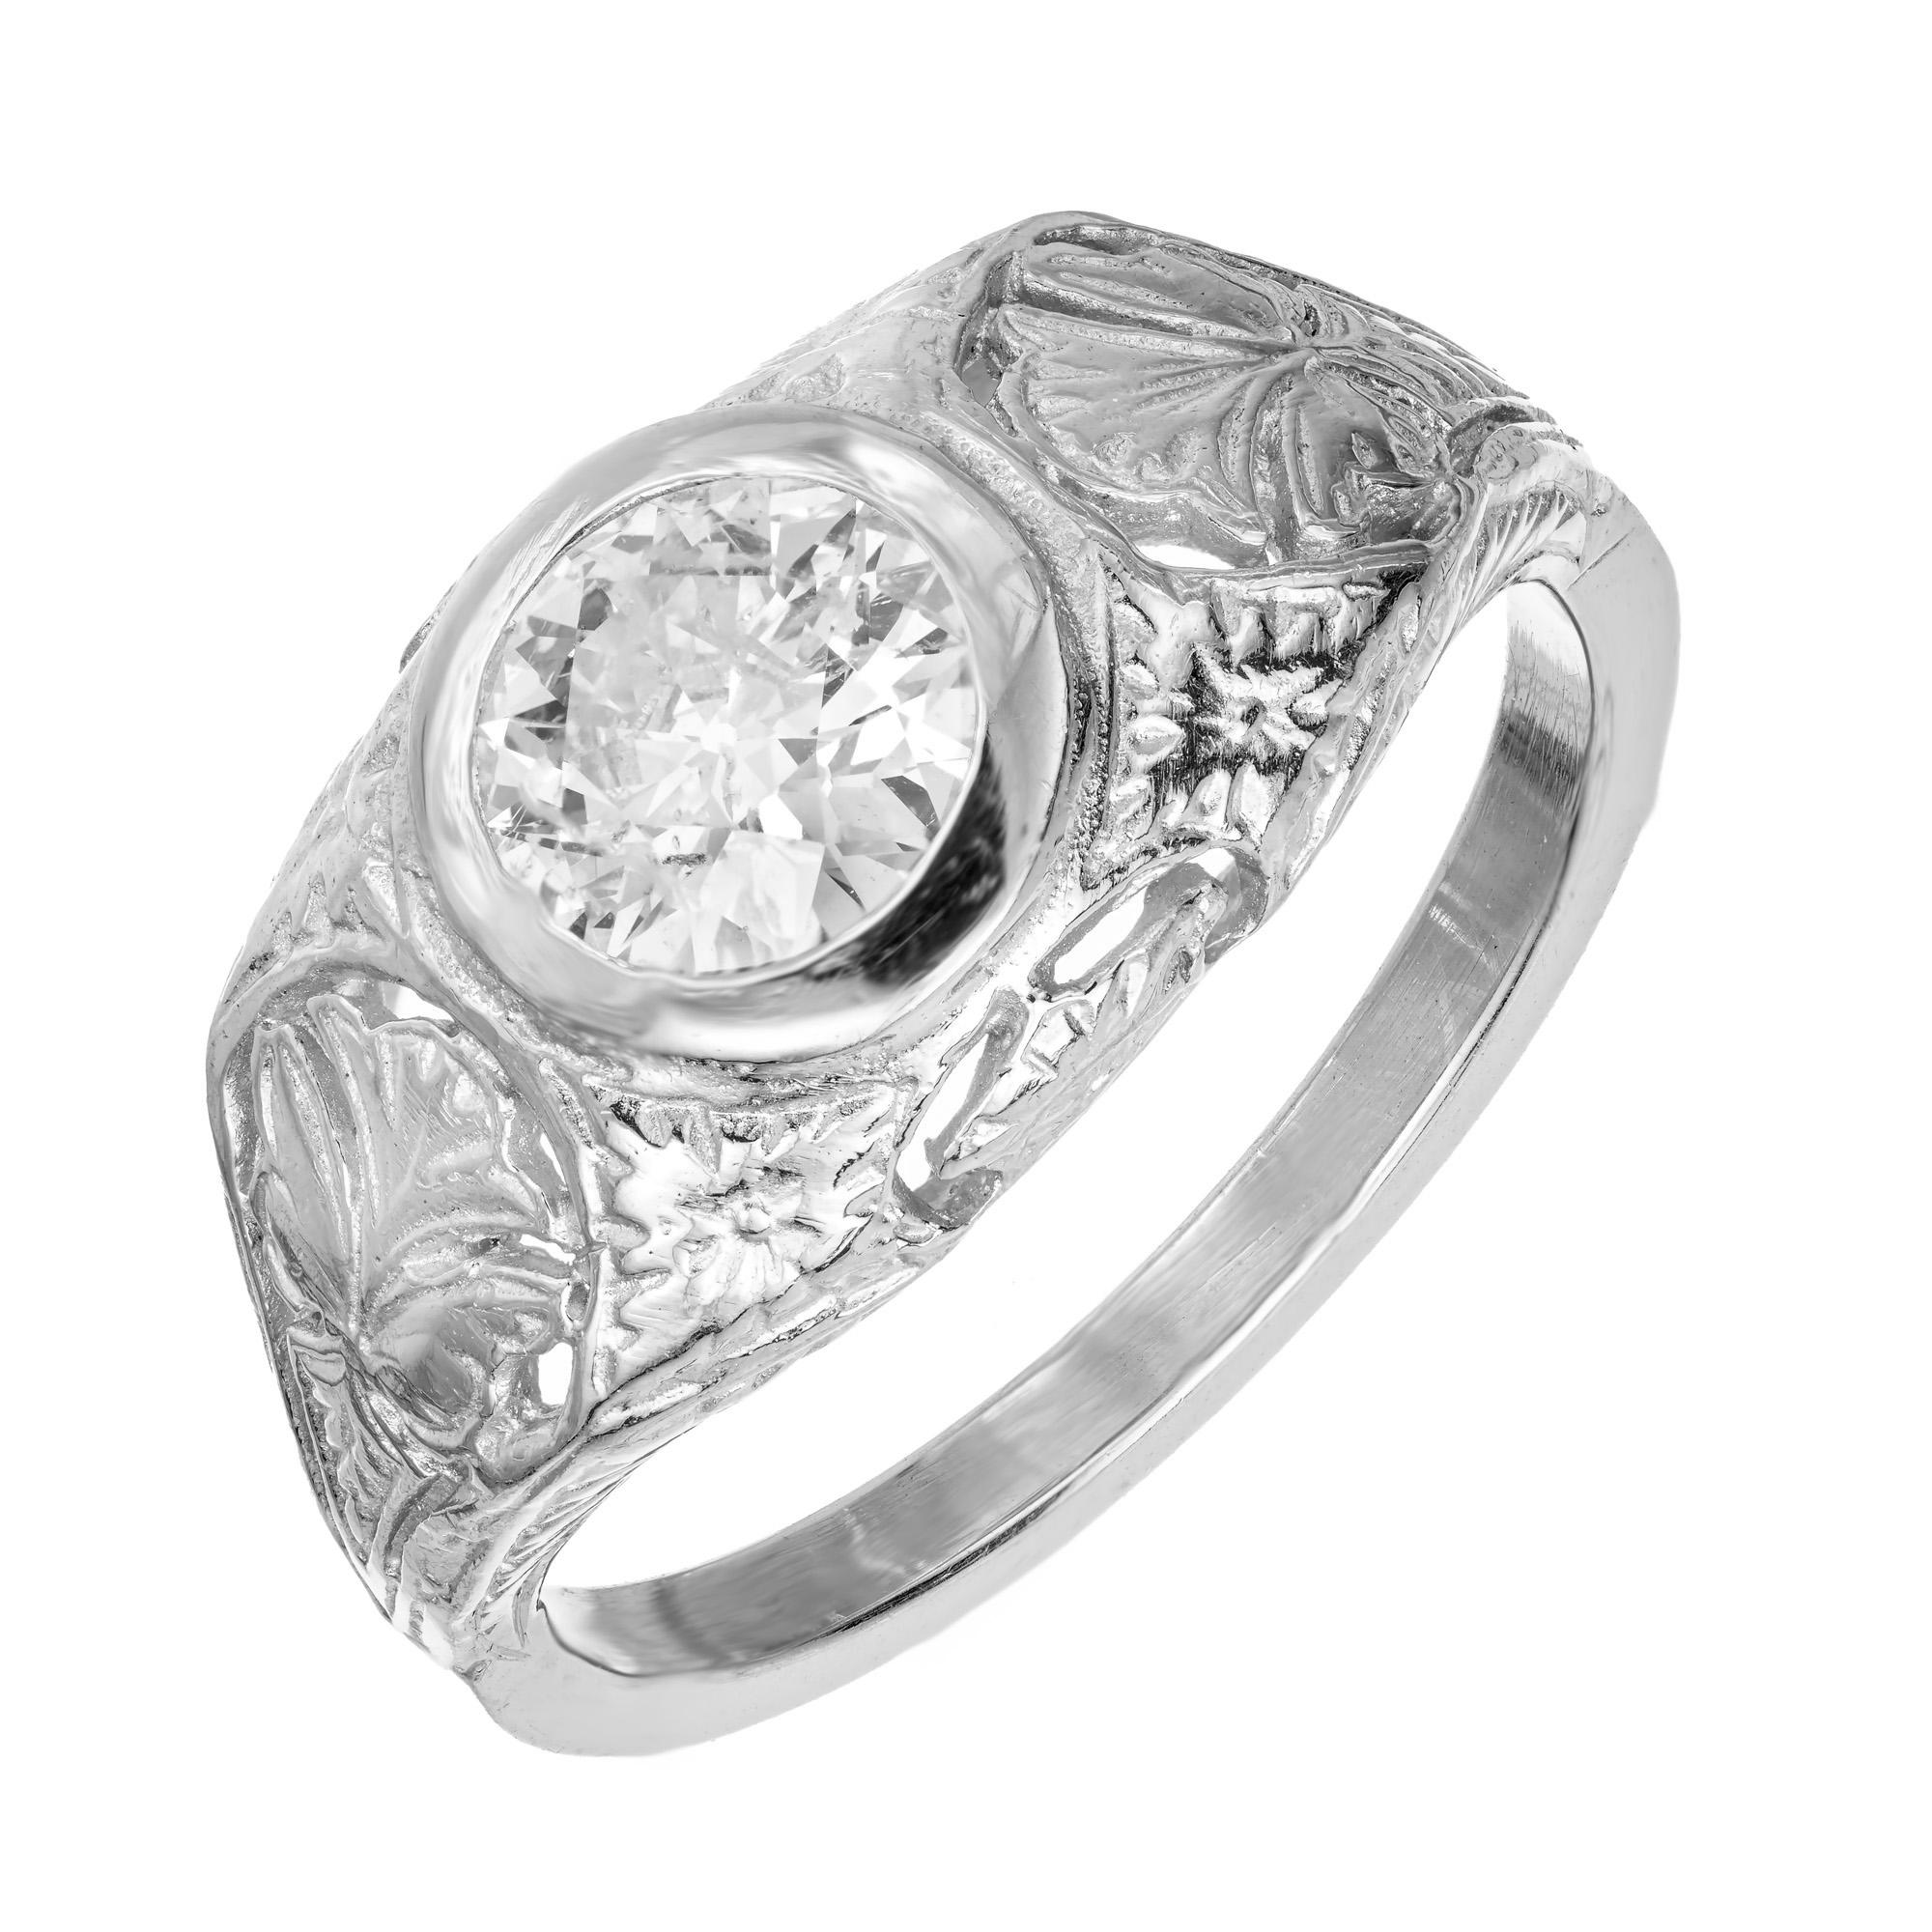 Men’s Art Deco diamond ring. GIA certified 1.10 Old European cut center diamond set in a platinum pierced engraved setting. Suitable for a woman as well.

1 old European cut diamond, approx. total weight 1.10cts, G, I1, 6.89 x 6.79 x 3.63mm, GIA